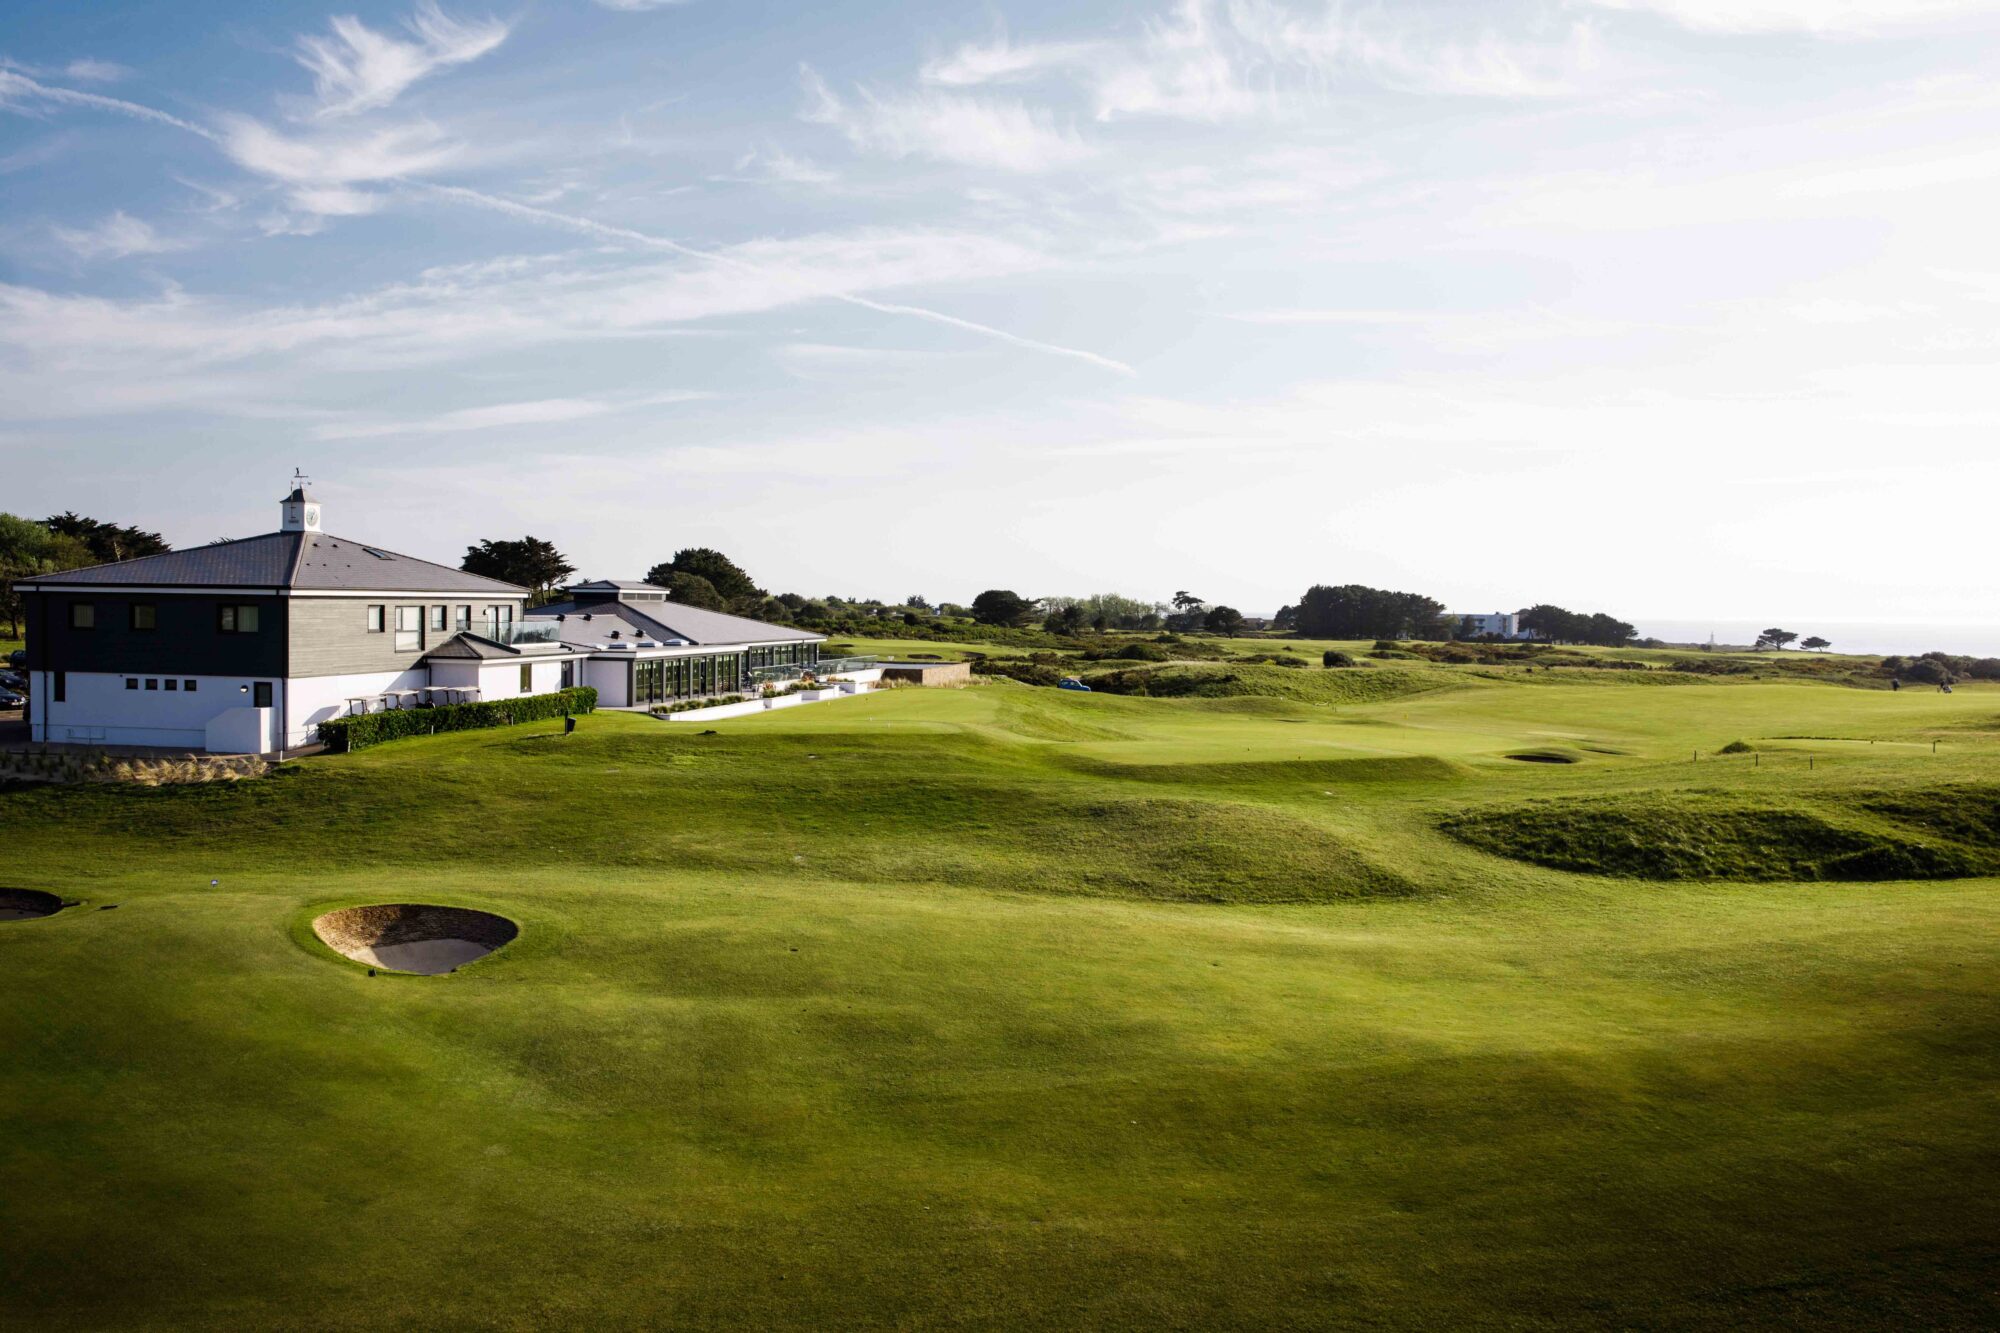 The one place in the British Isles where you can still play golf